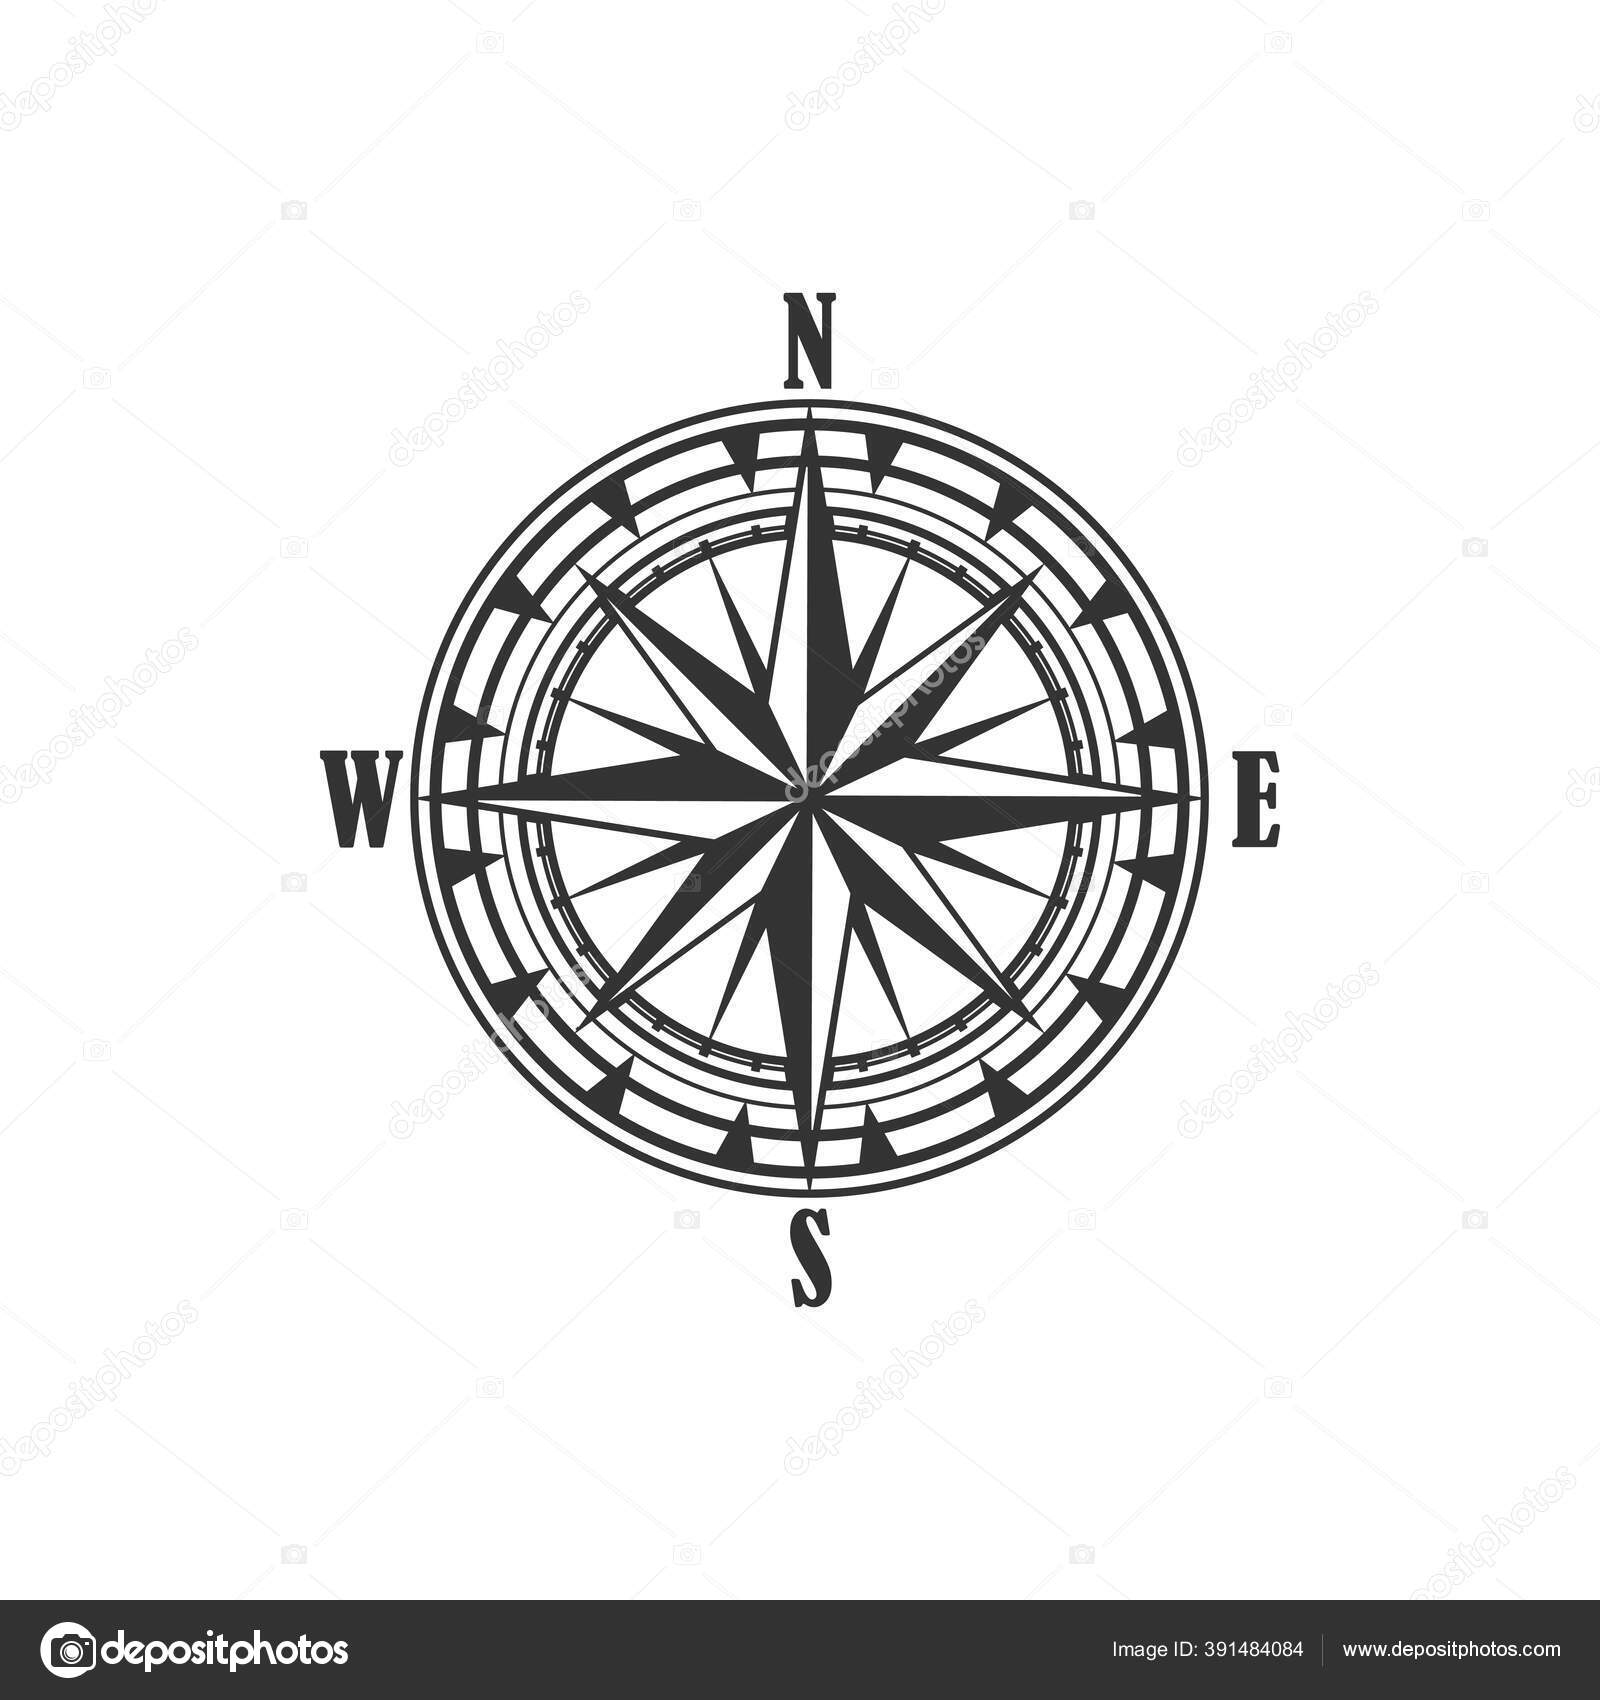 Vector Compass Rose with North, South, East and West Indicated Stock Vector  - Illustration of marine, navigation: 148818570